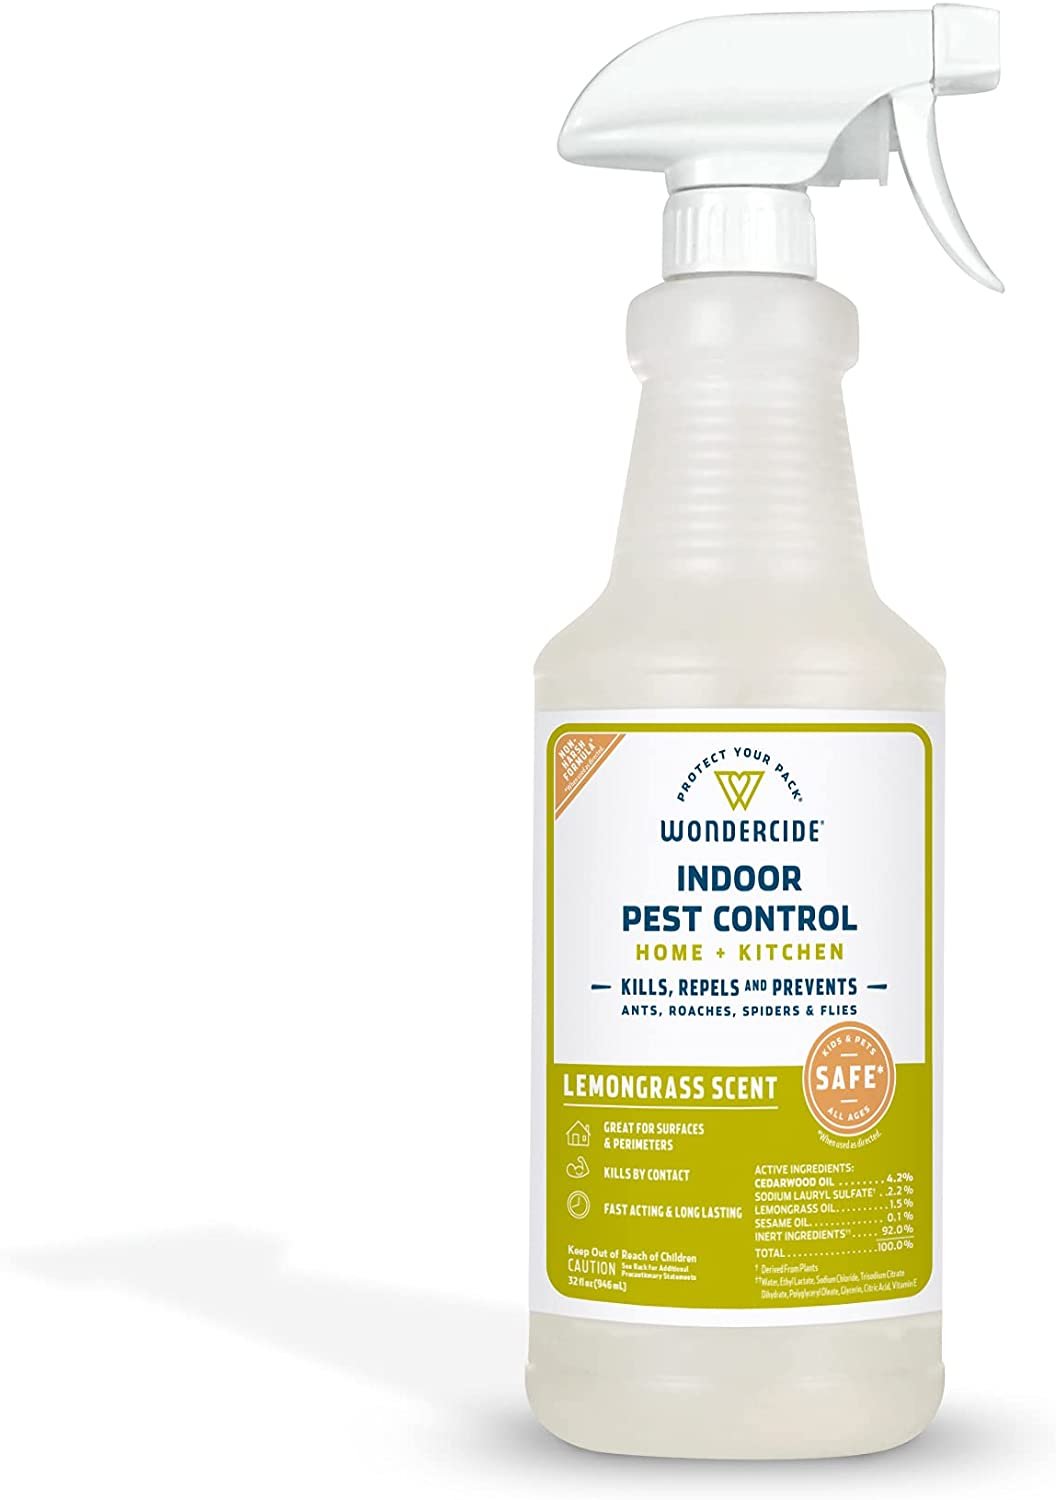 Wondercide Natural Products - Indoor Pest Control Spray